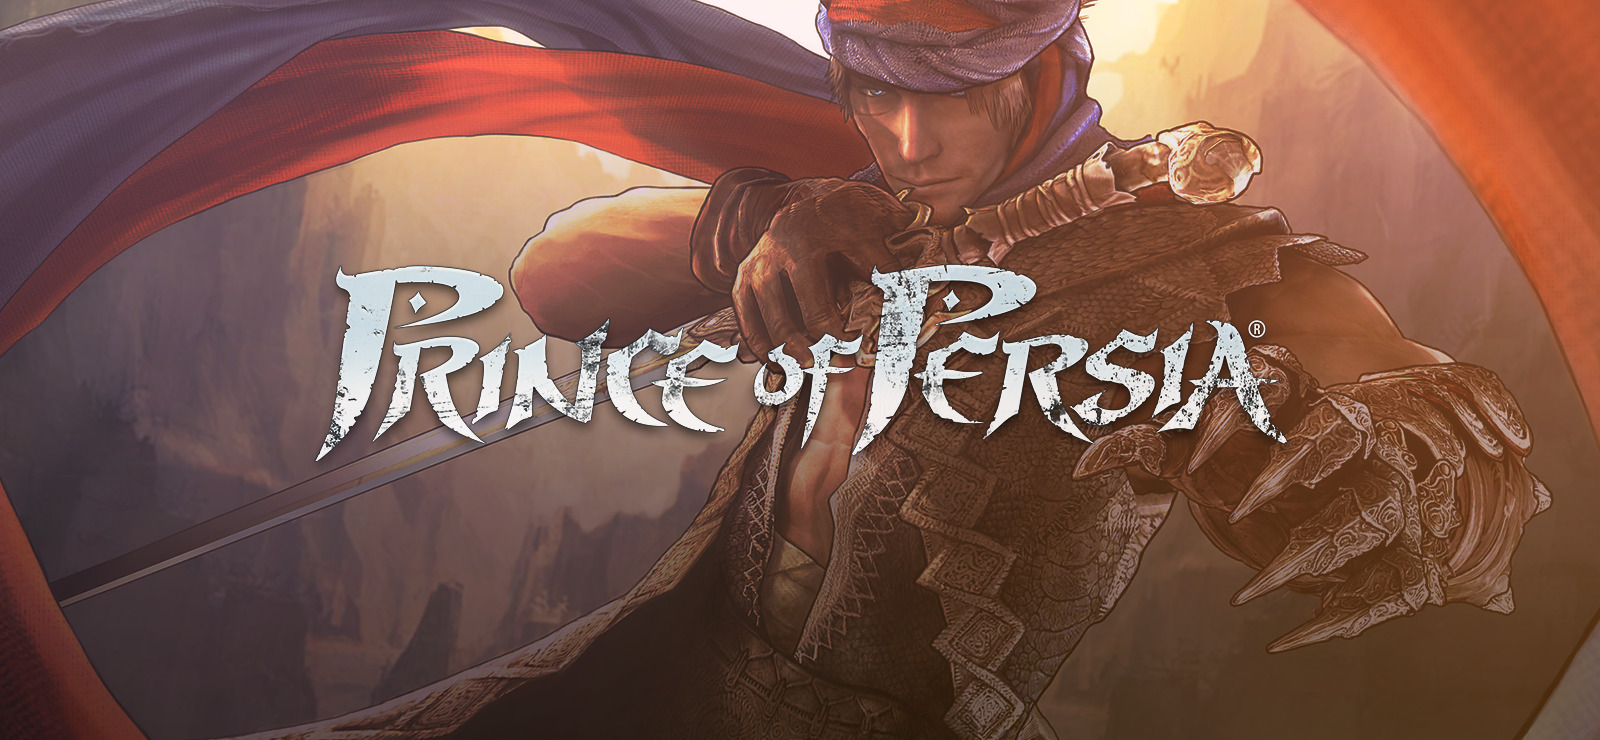 Prince of Persia on 